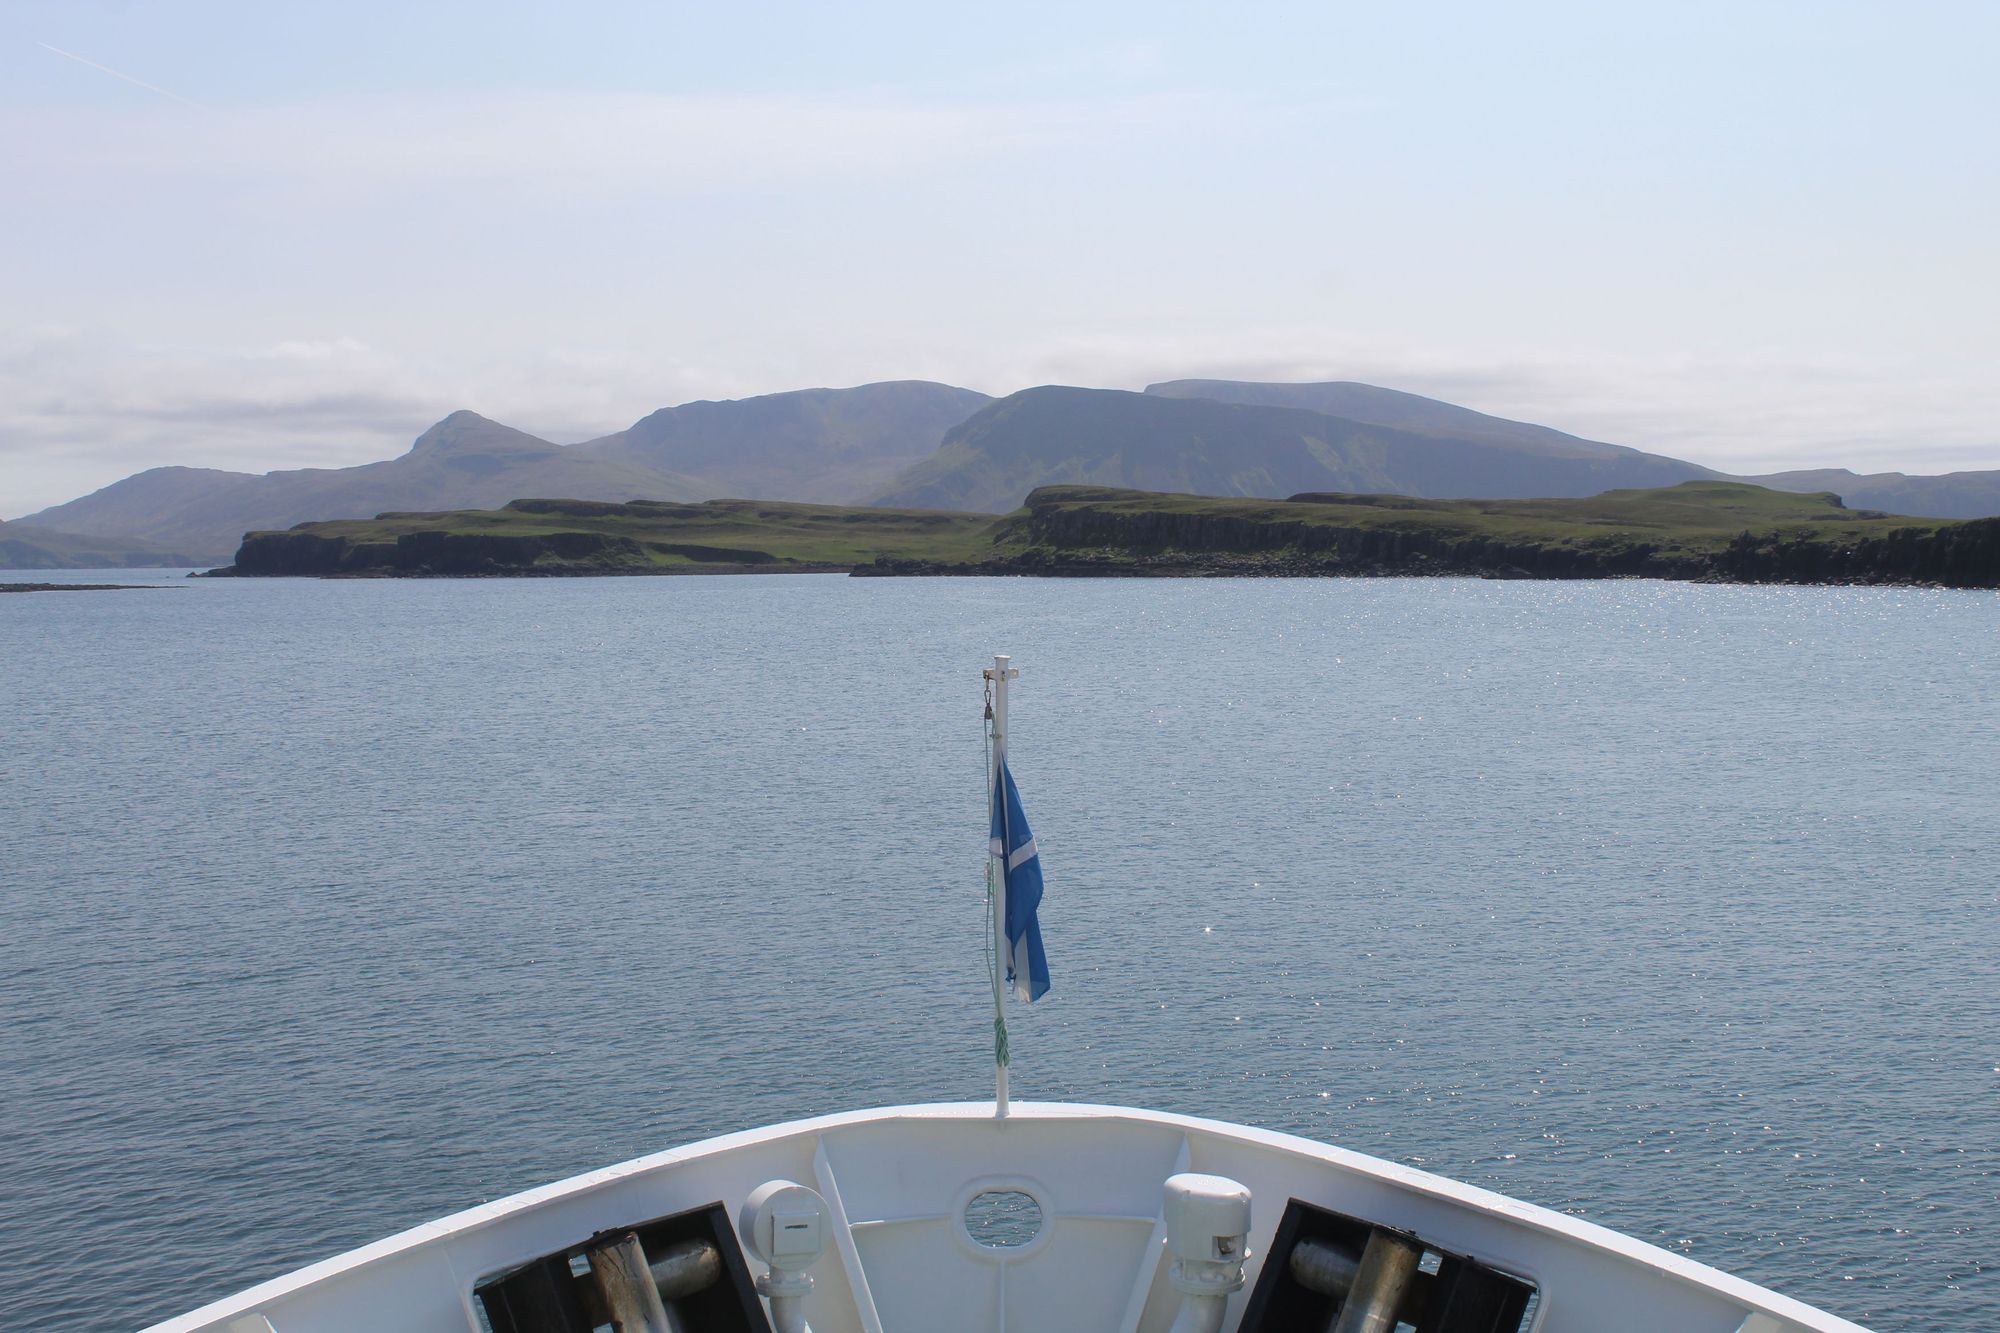 The views back to Rùm from the Isle of Canna, on the Caledonian MacBrayne ferry. Photo: Stuart Kenny